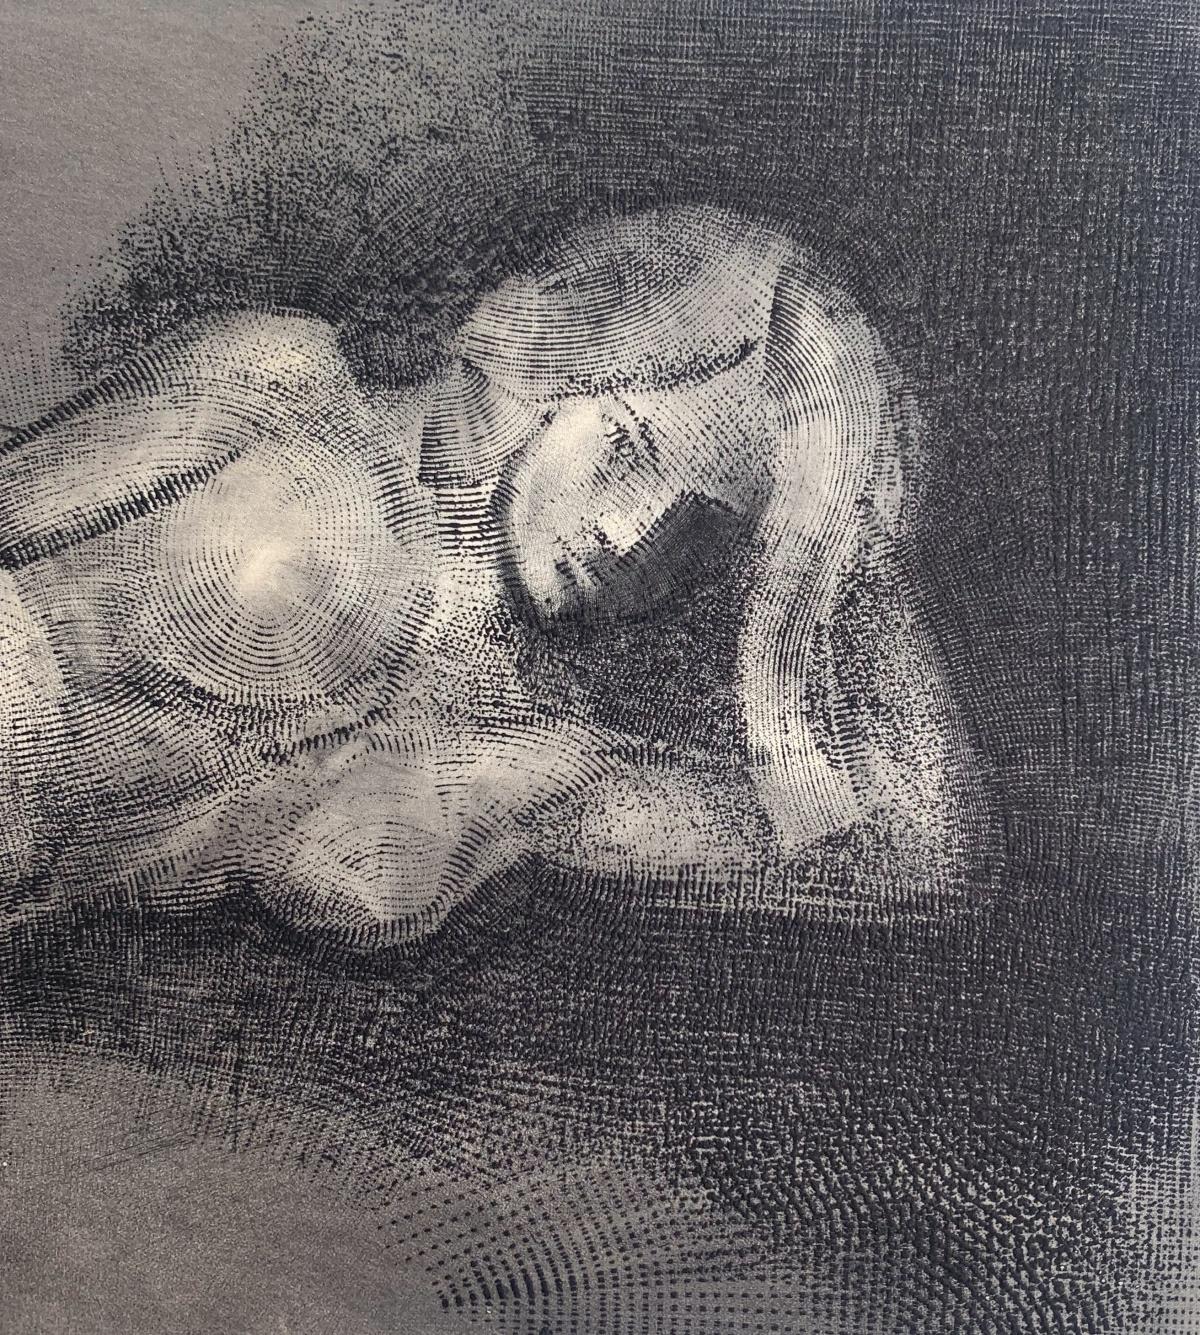 Contemporary figurative etching print by Polish arist living in Canada, Pawel Zablocki. Print depicts a woman laying on her side with head resting on her arm. Artwork is monochromatic. Artist's unique technique of printmaking creates interesting